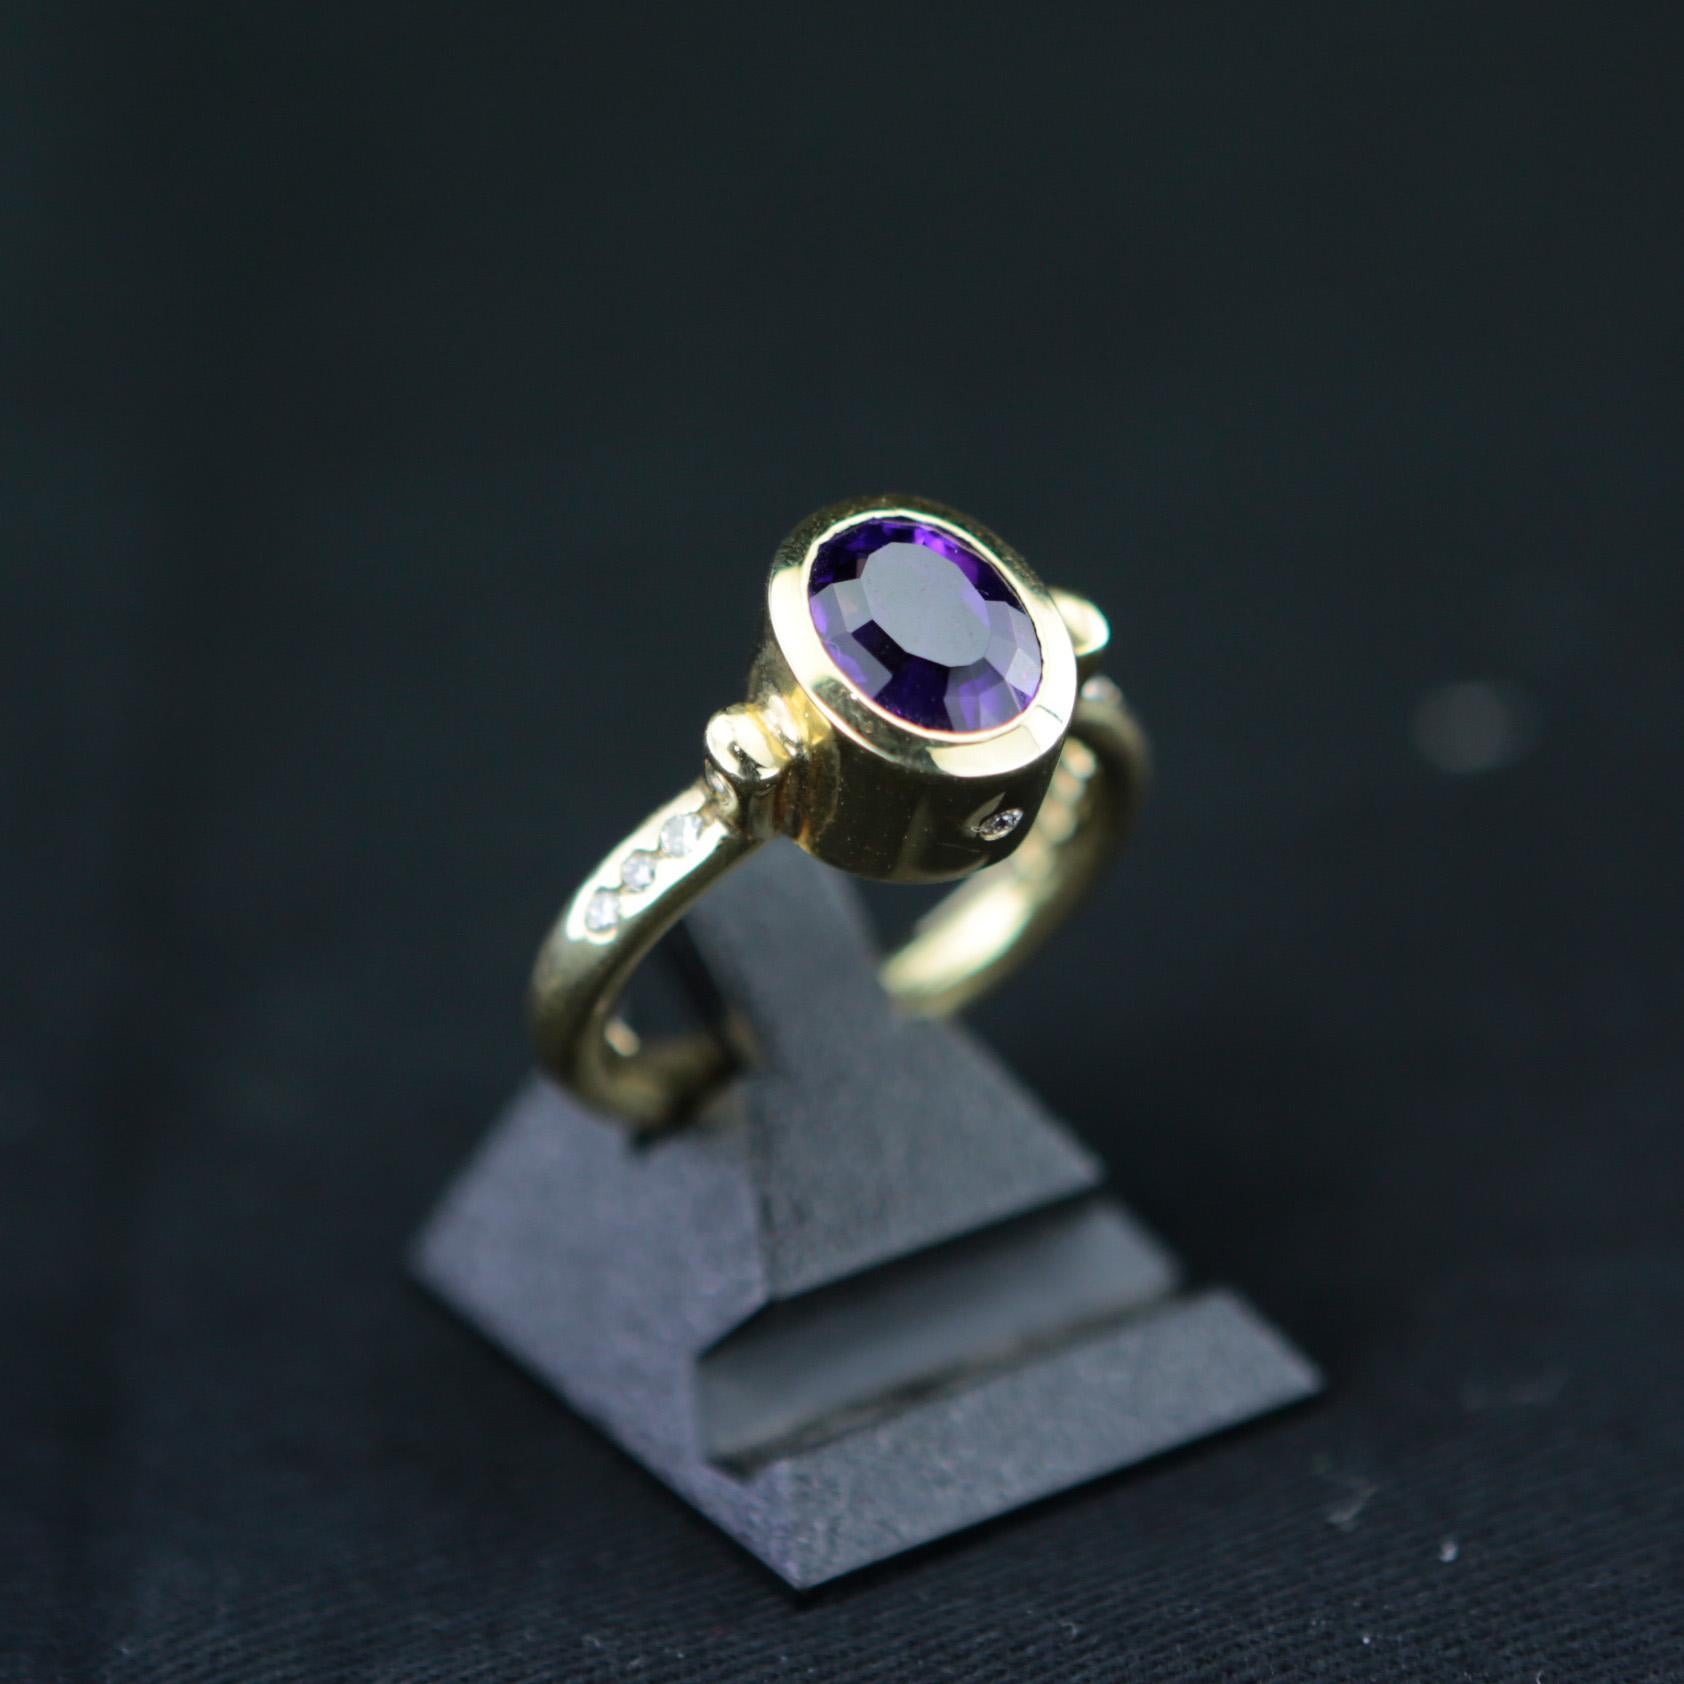  


Yellow gold ring with oval amethyst, 585/- gold, set with a total of 10 brilliant-cut diamonds in the shank and the head, total 0.2ct, ring size 57

A magnificently designed ring that places the wonderful oval-cut amethyst in the foreground. It